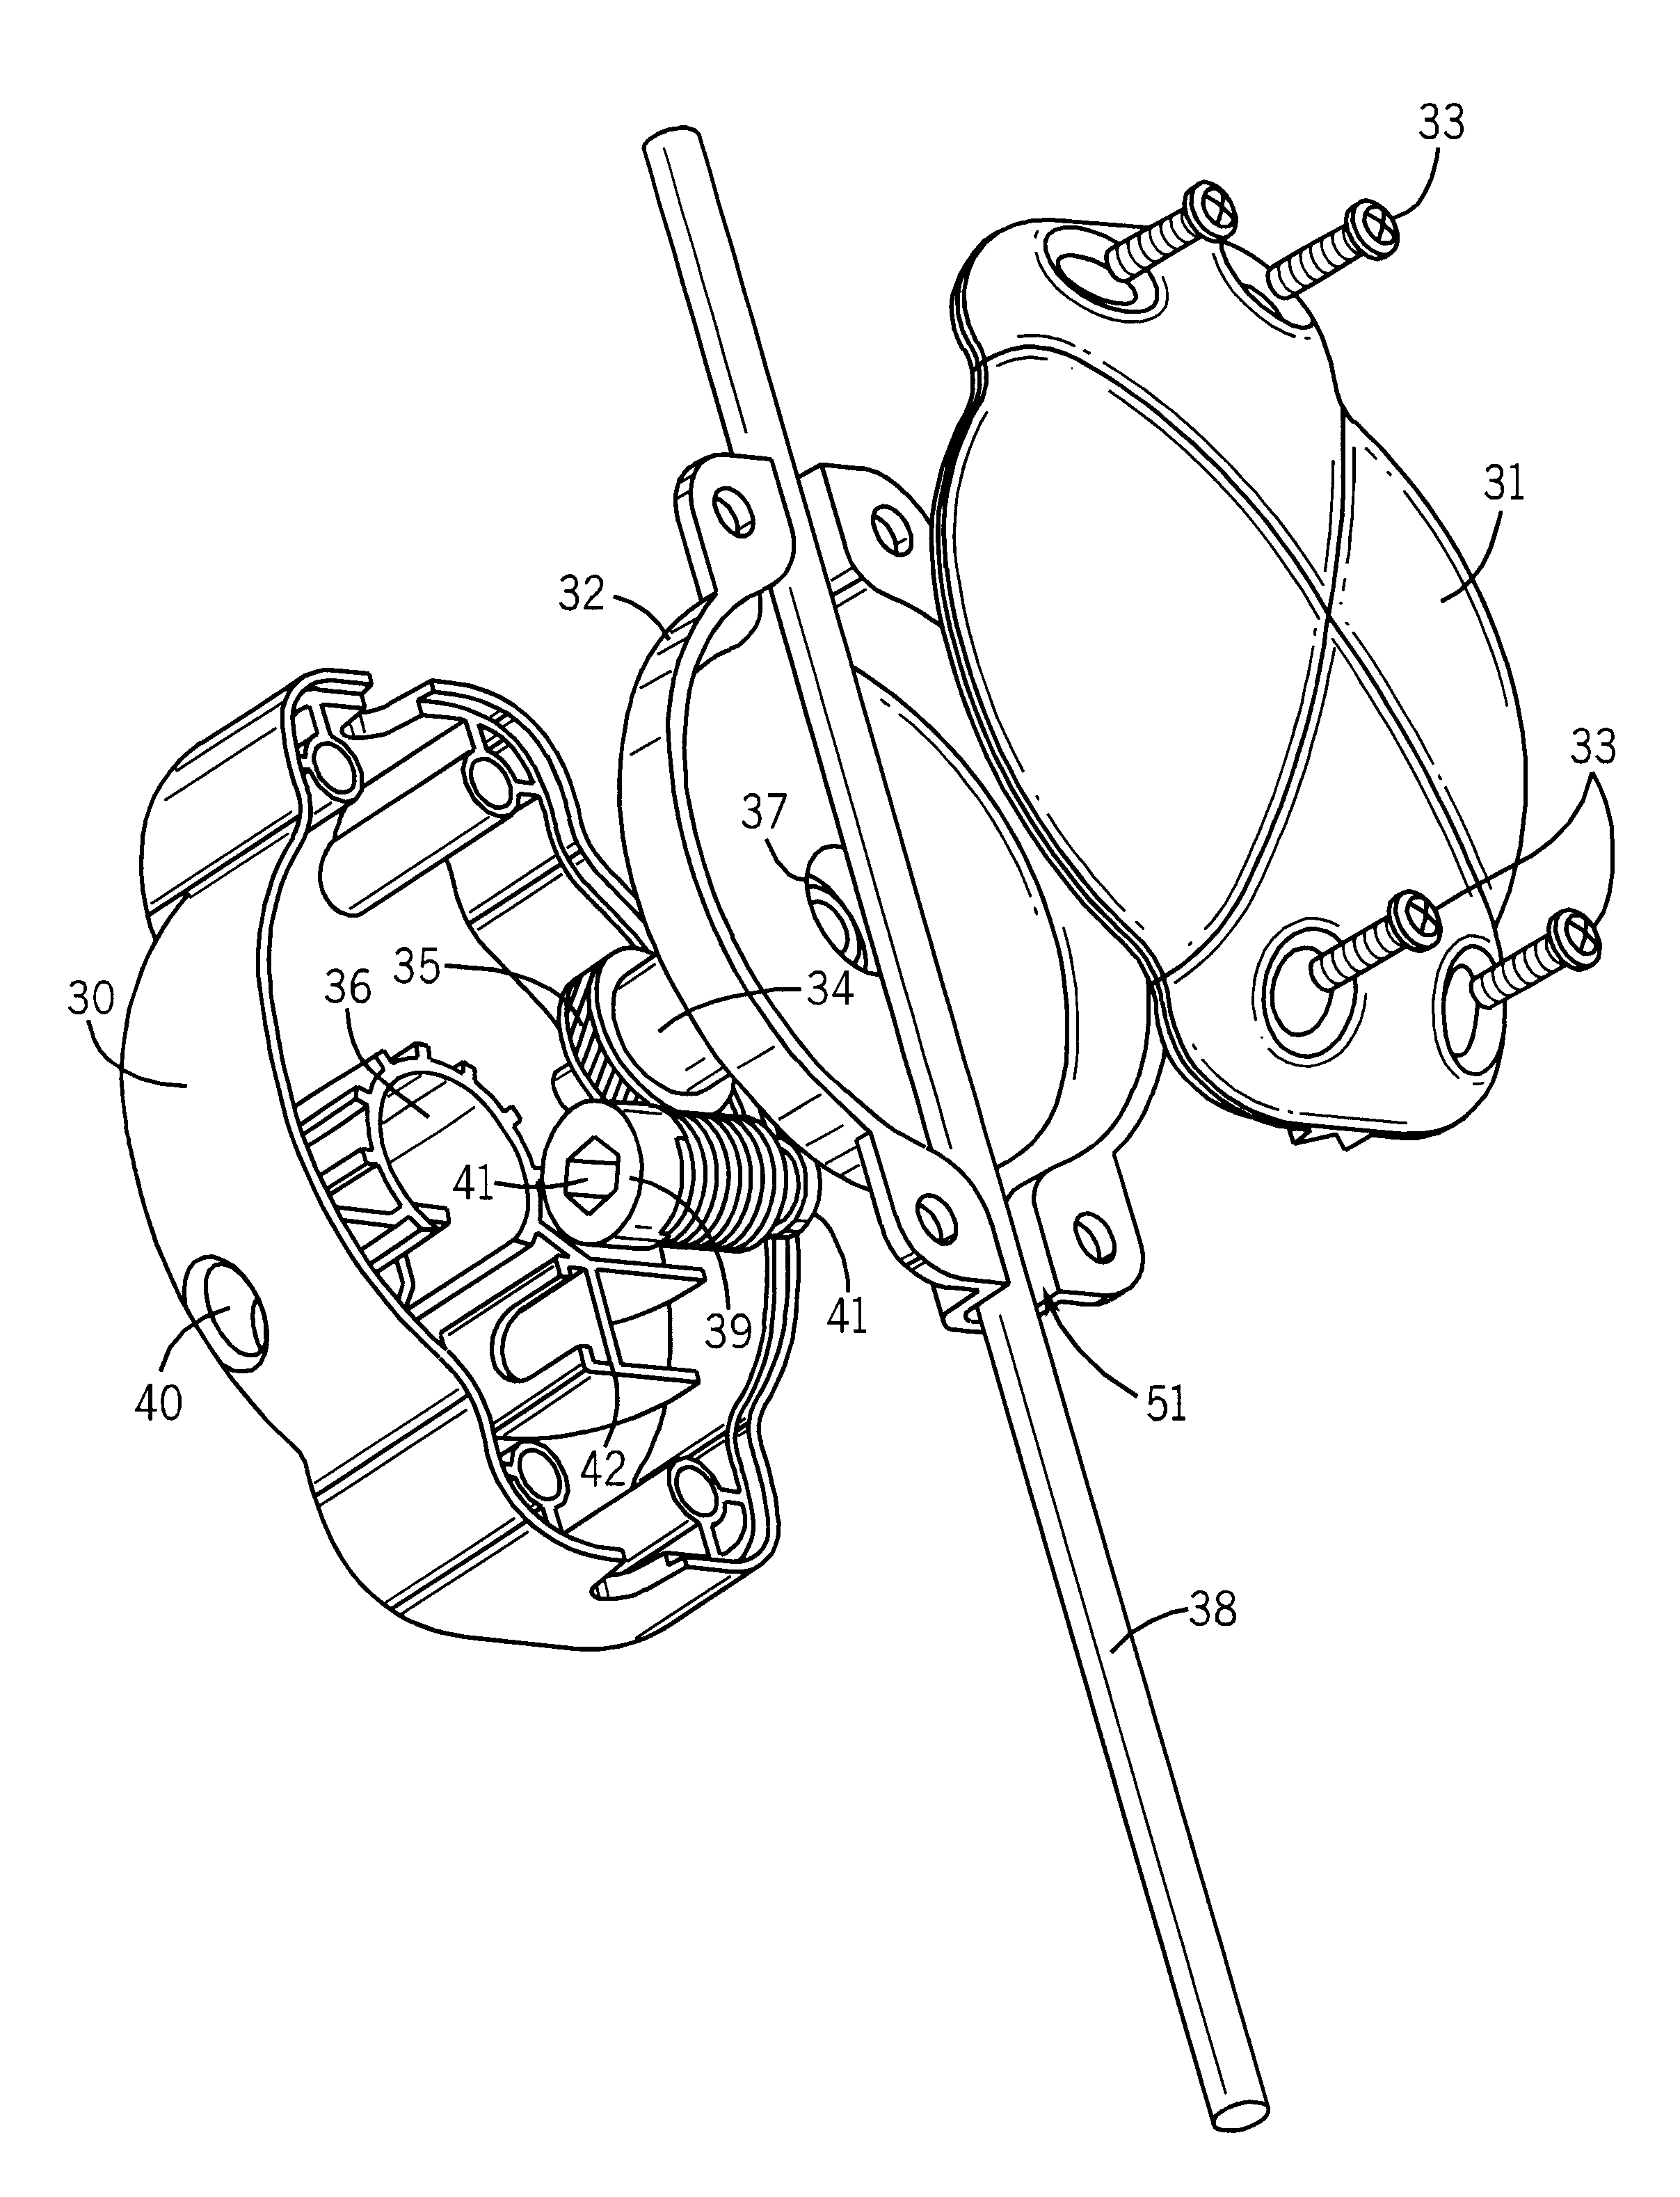 Modified rope tensioner